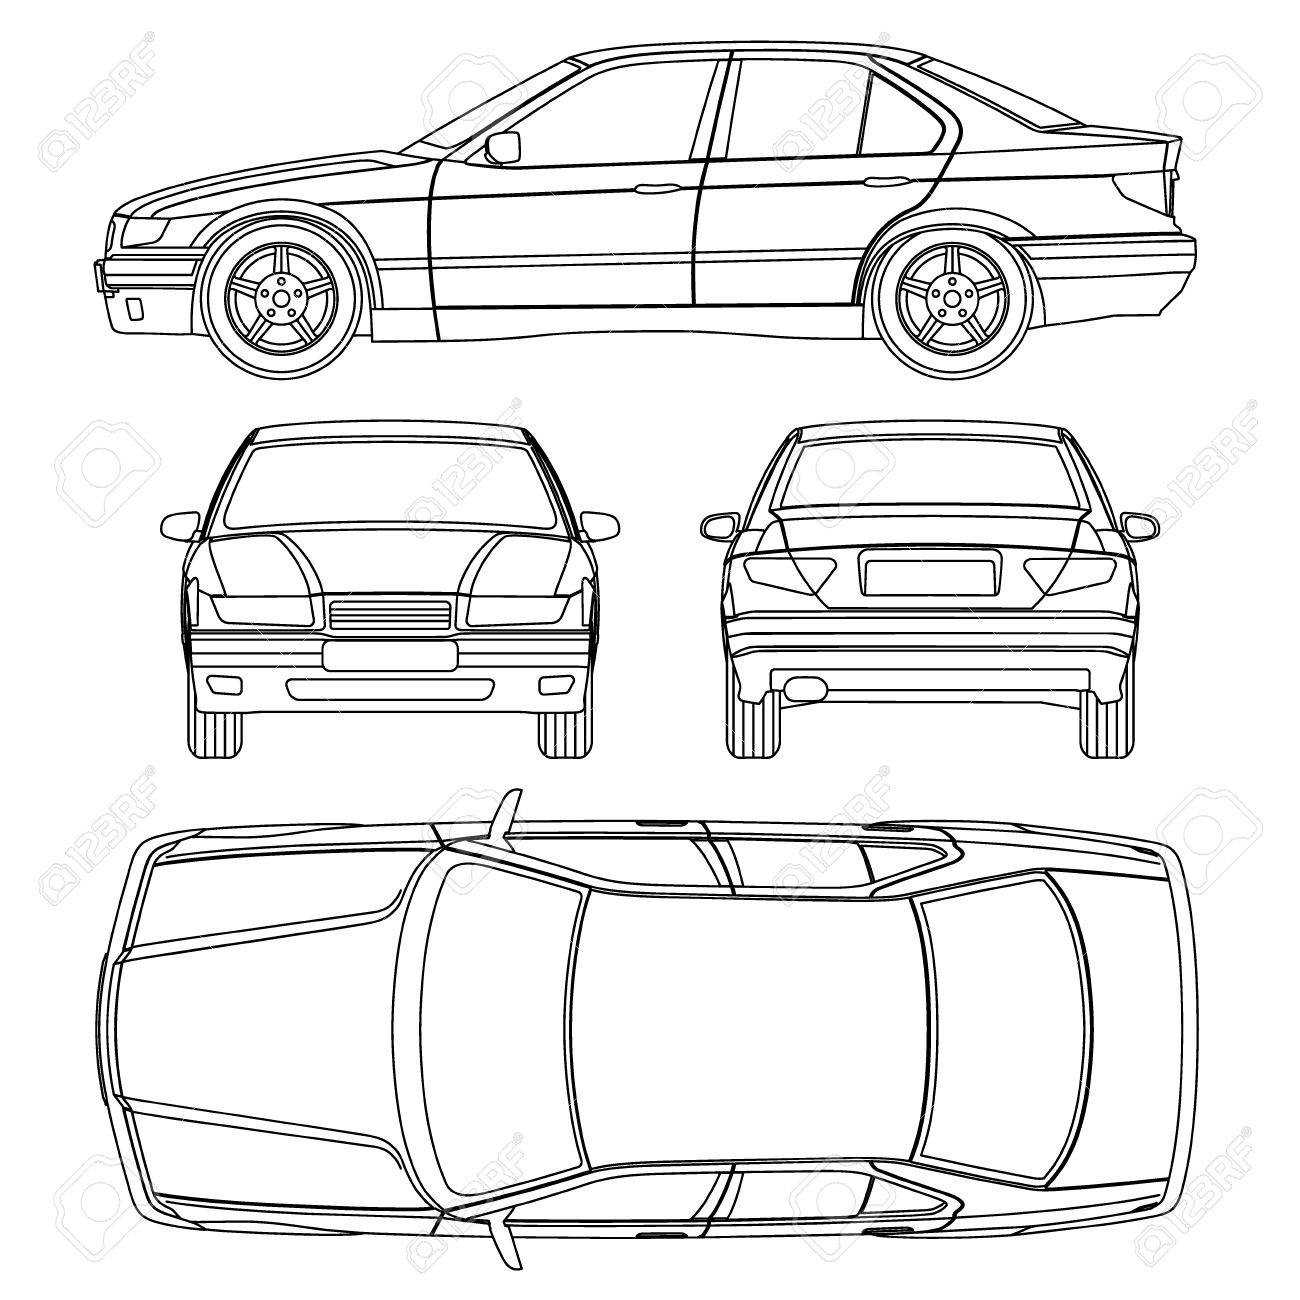 Car Line Draw Insurance Damage, Condition Report Form Inside Car Damage Report Template